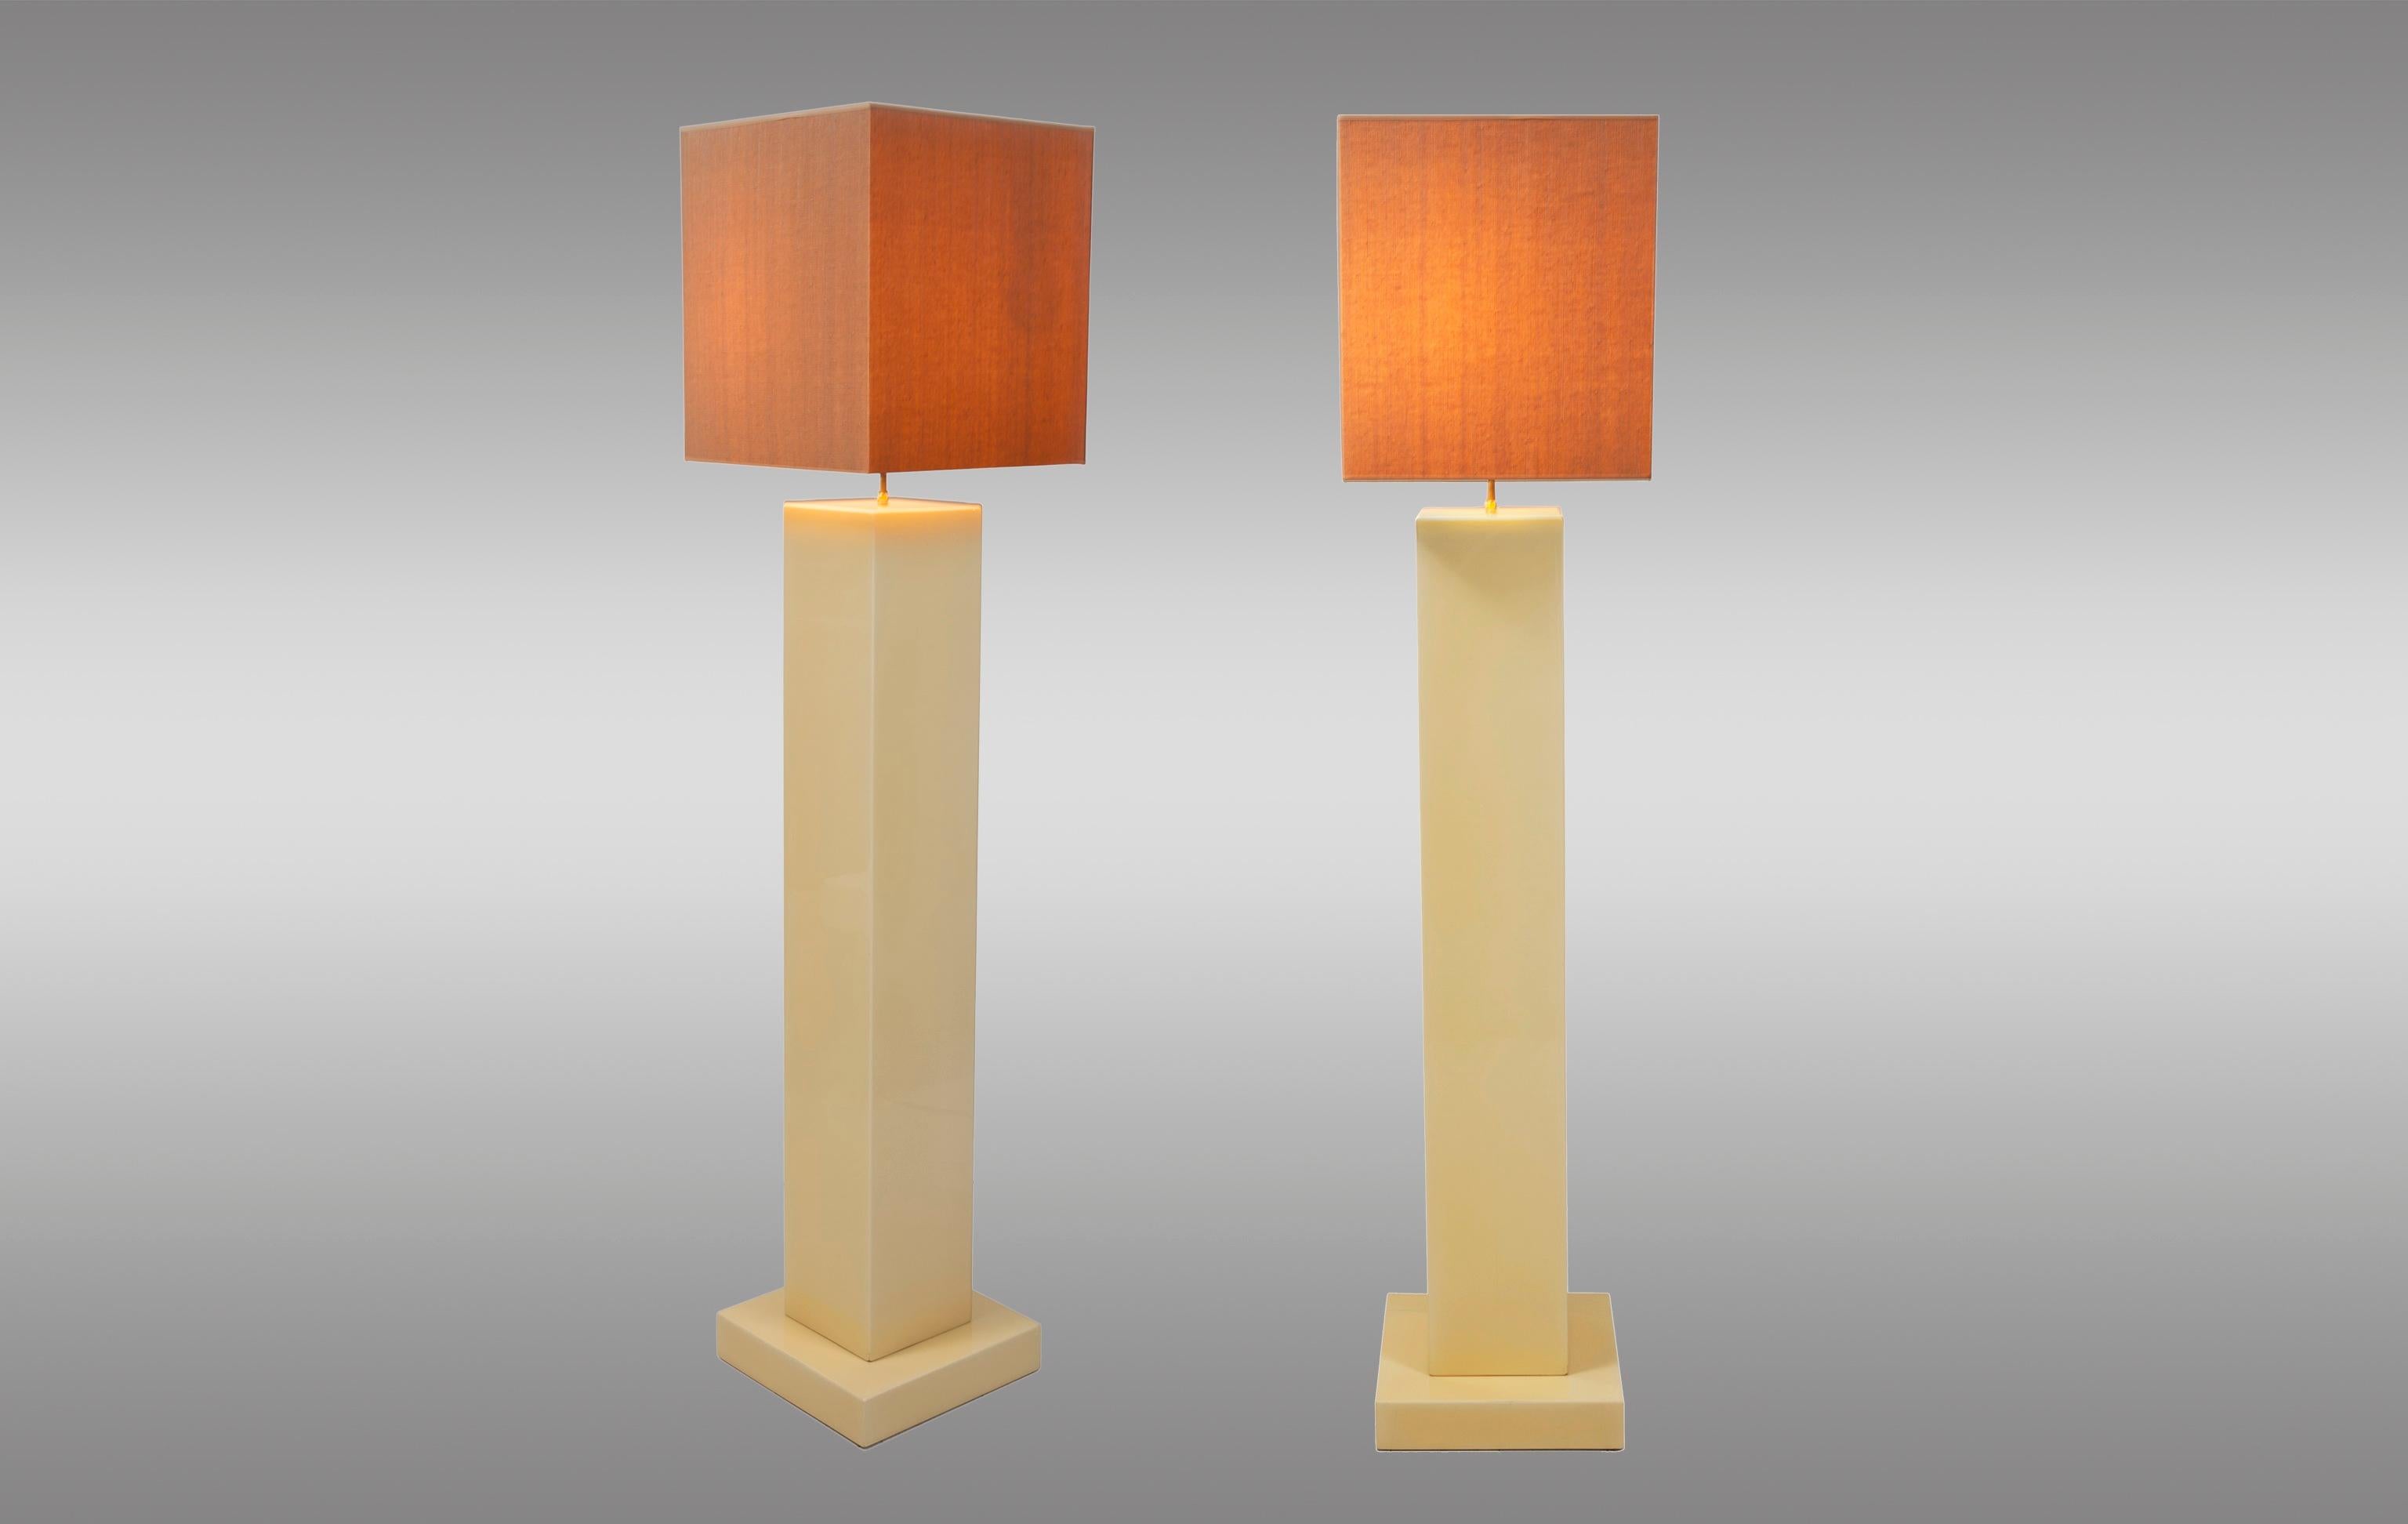 Lacquered Wood Floor Lamps, 1970s For Sale 6